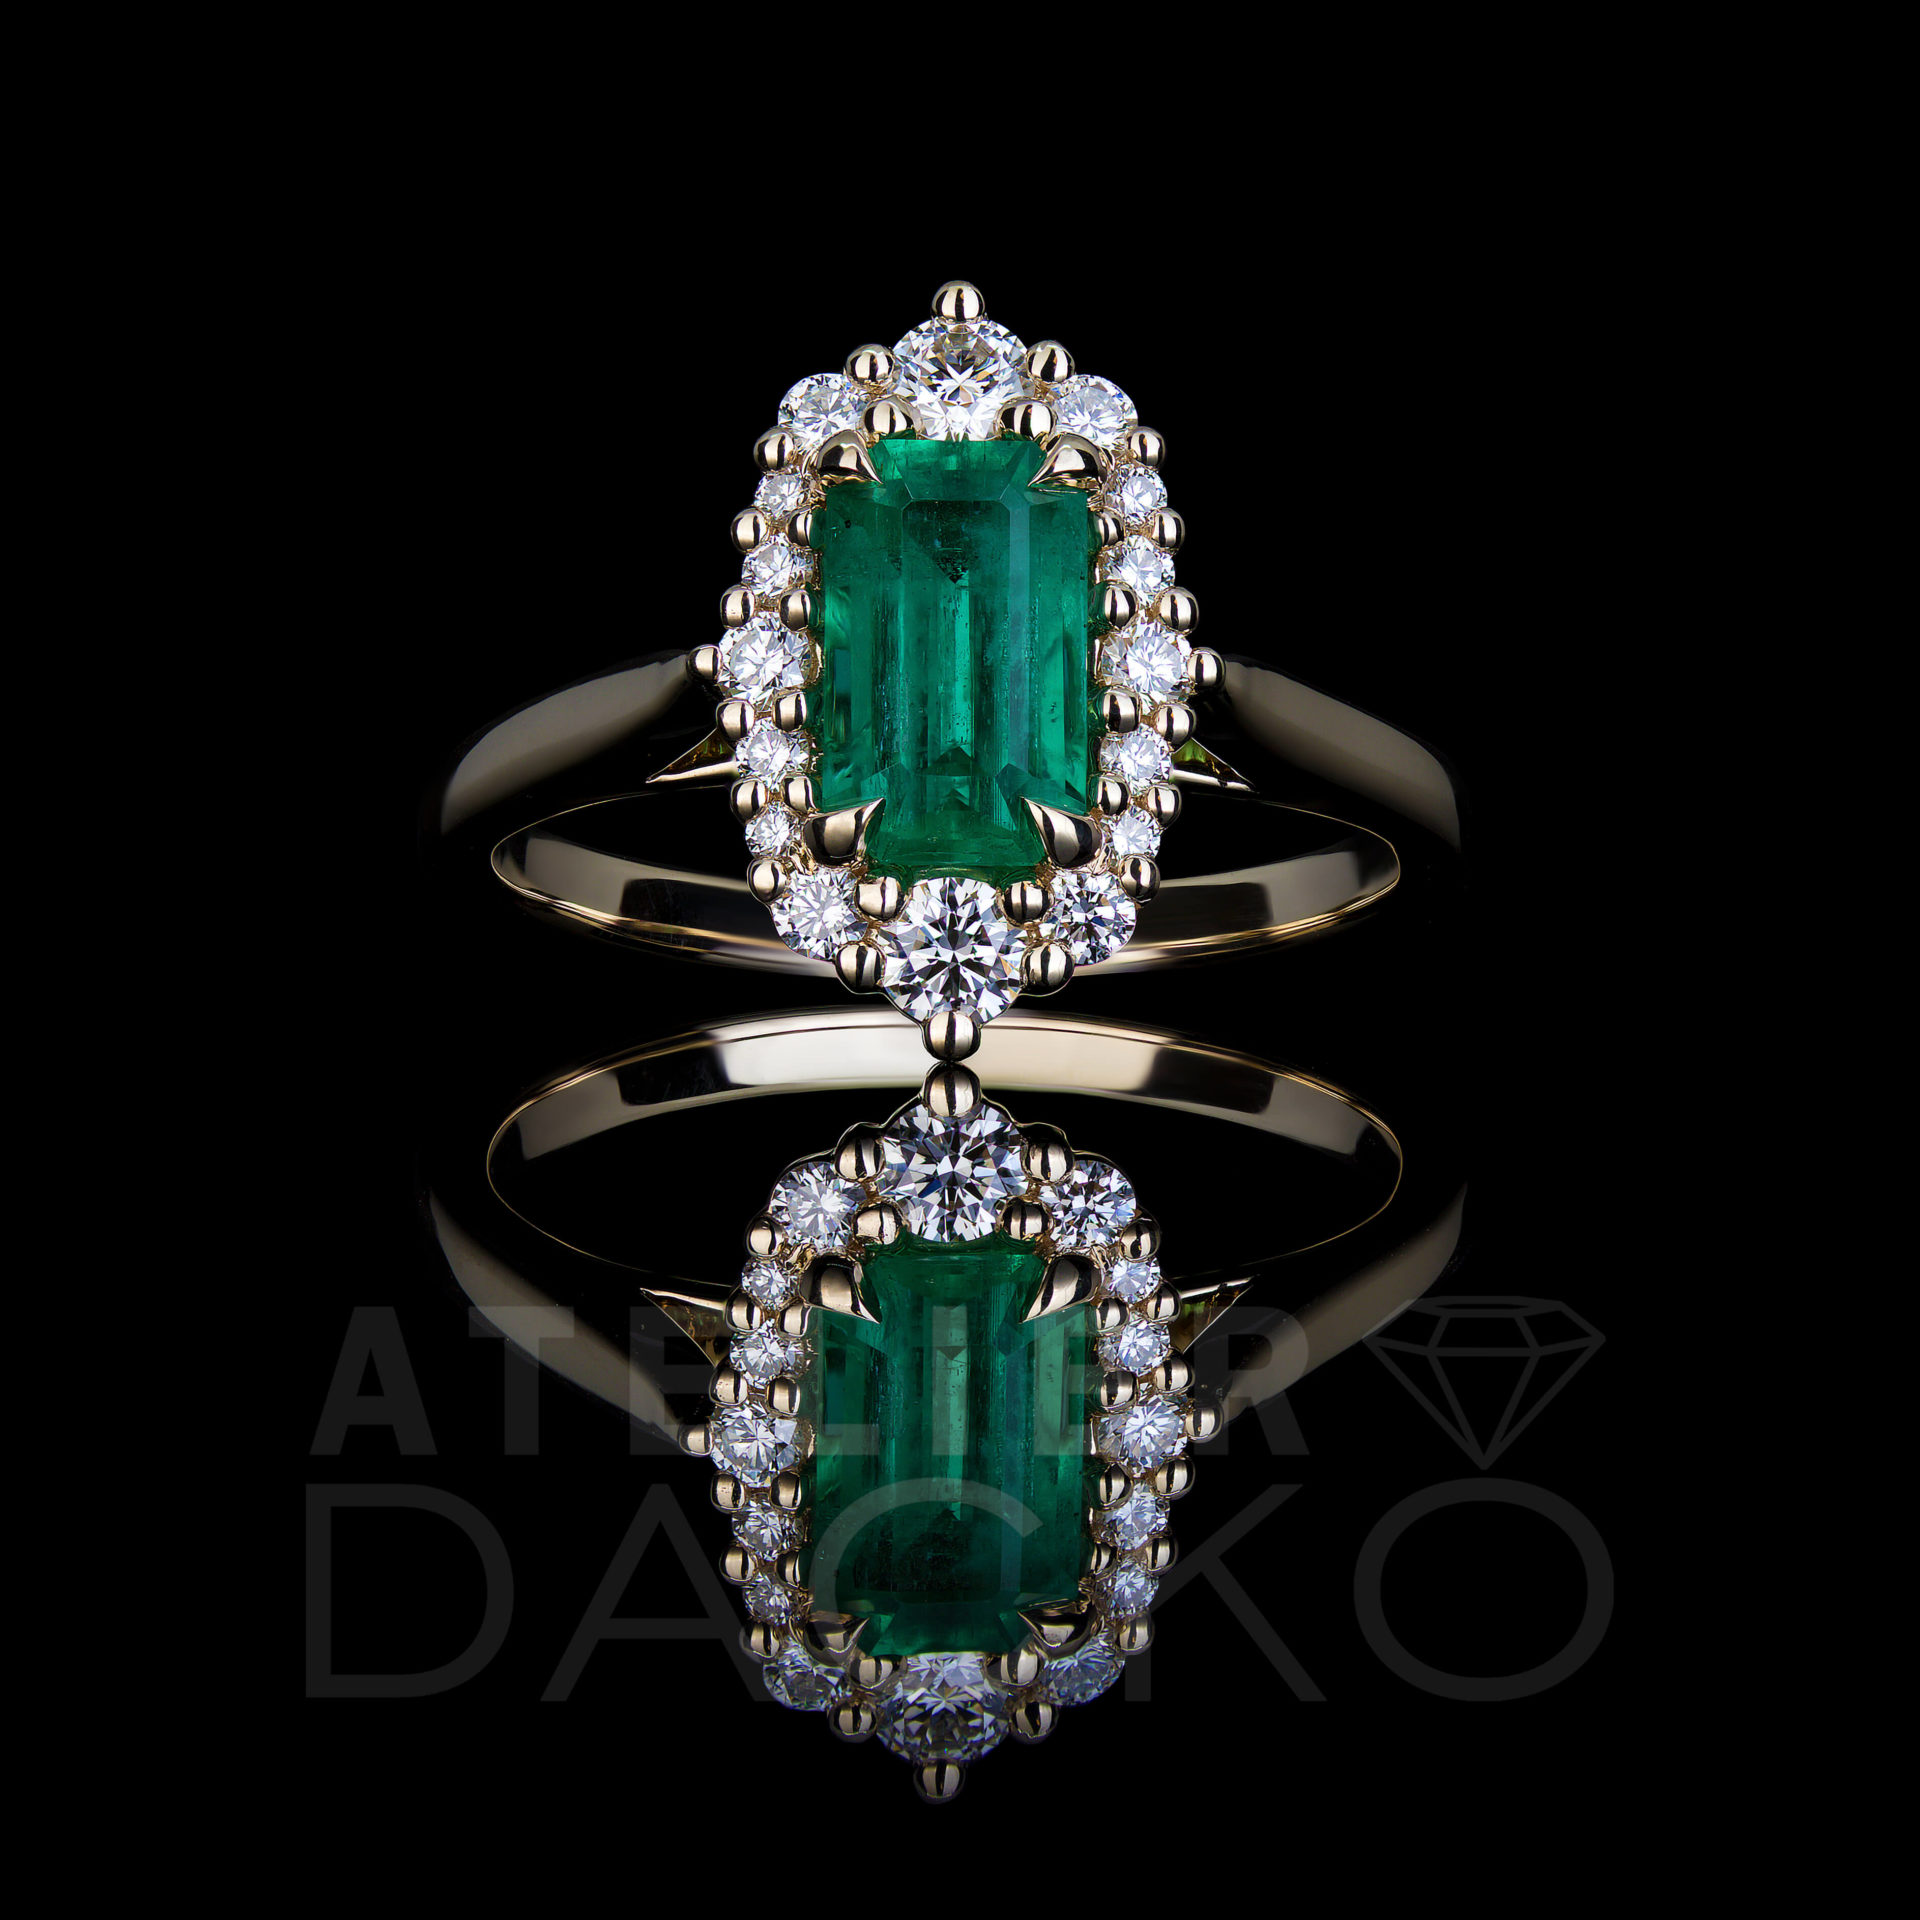 Front Facing 1.12 CT Emerald Ring with a Modern Vintage Diamond Halo